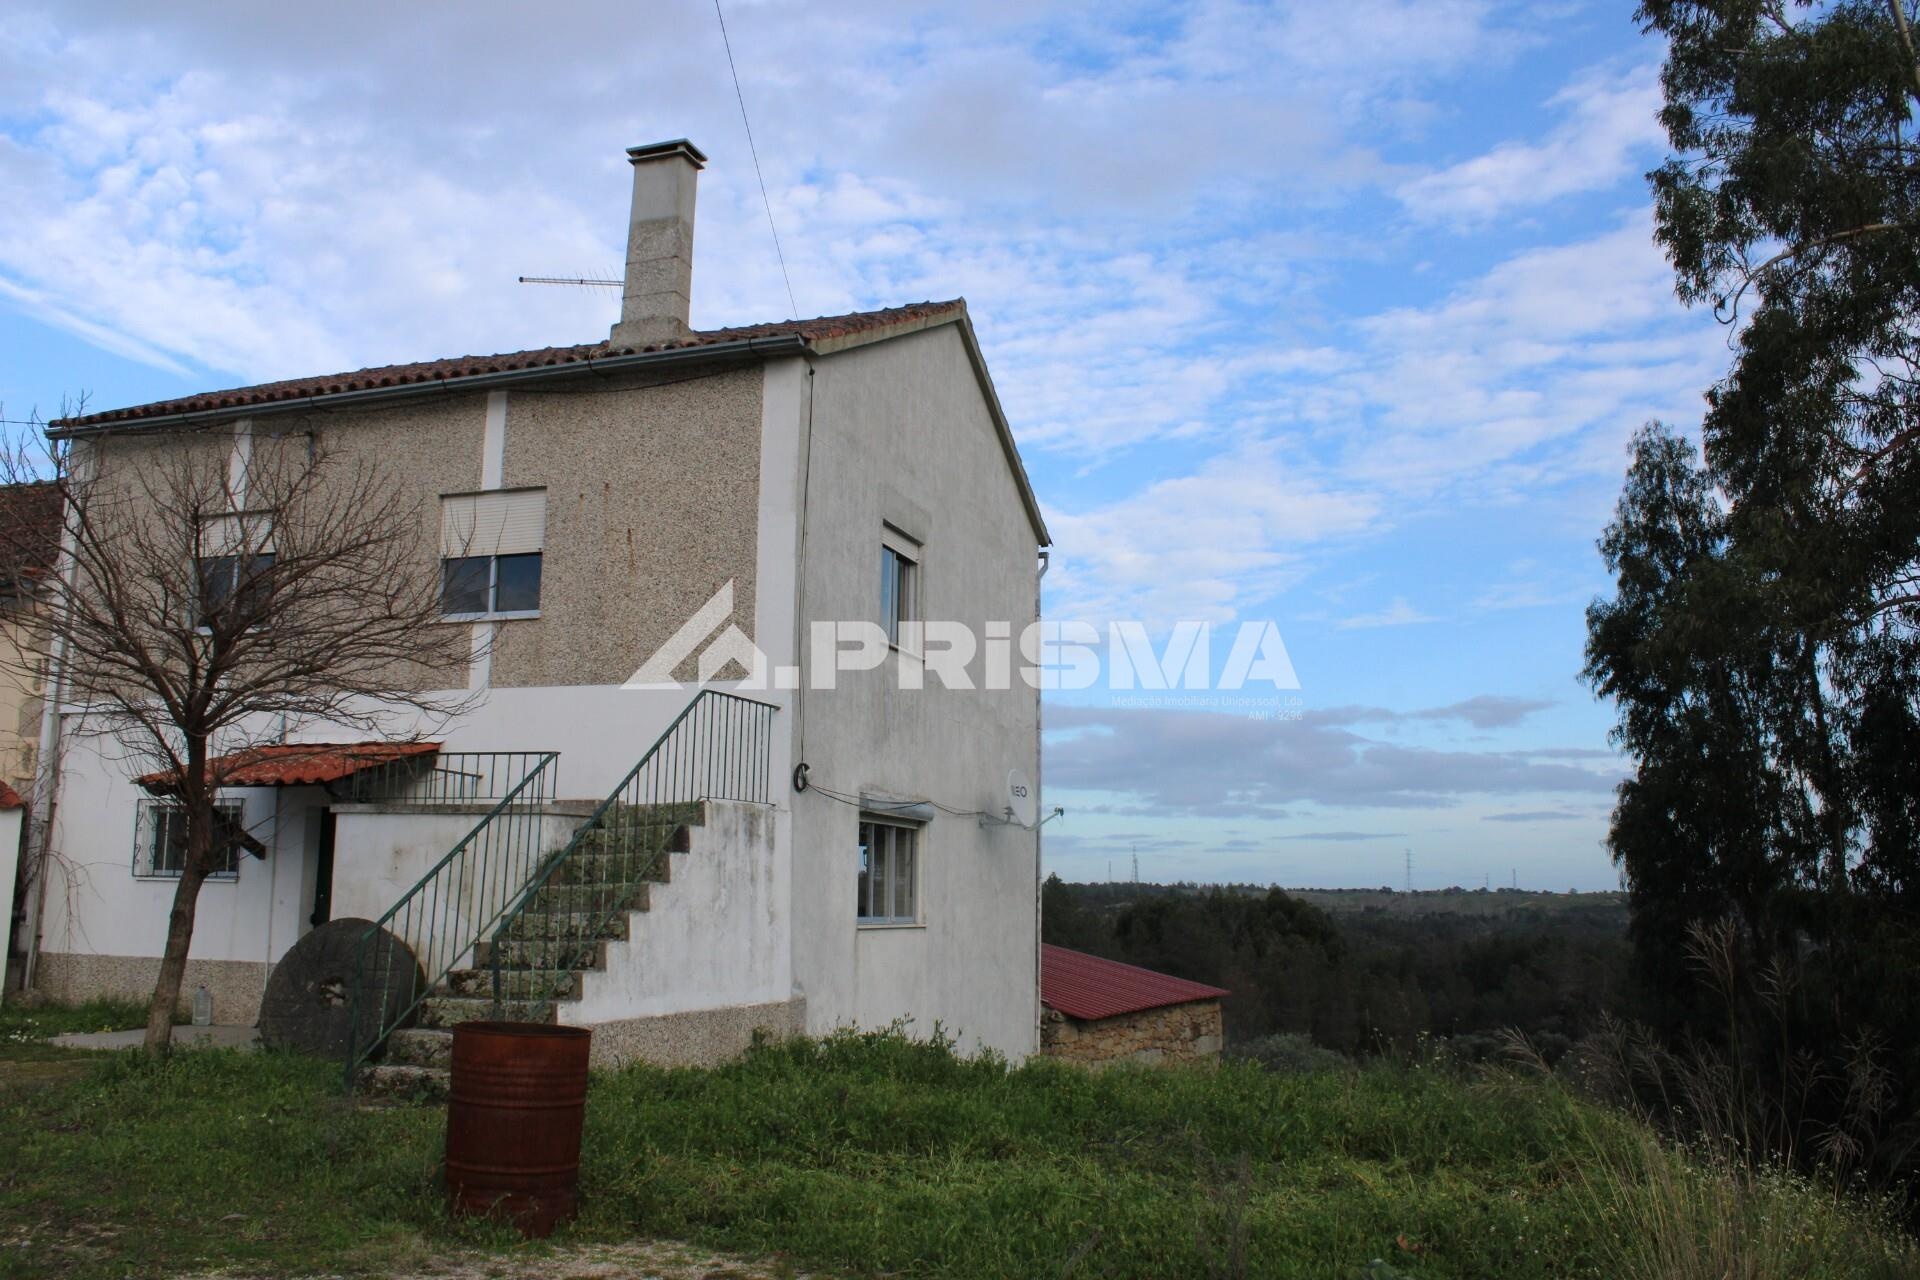 3 bedroom house with land and attachments for sale in Castelo Branco